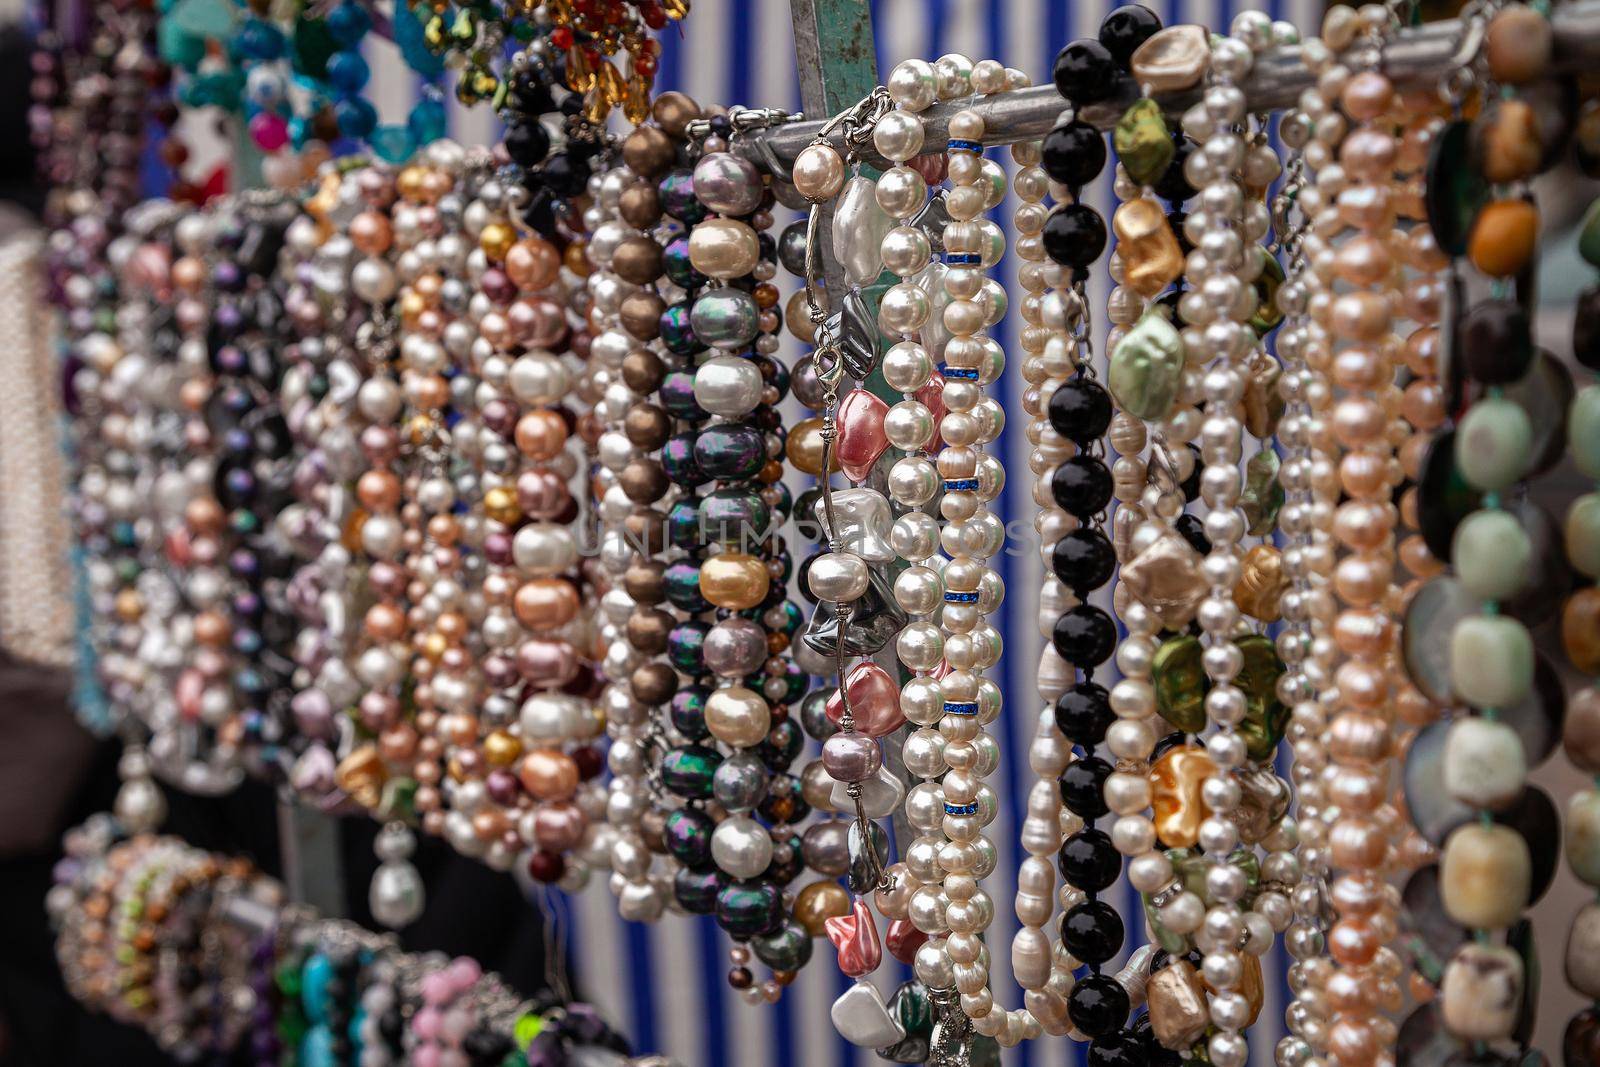 Various colorful beads in the market. Wallpaper background of a colorful necklace made of precious stones and colored beads. by ViShark